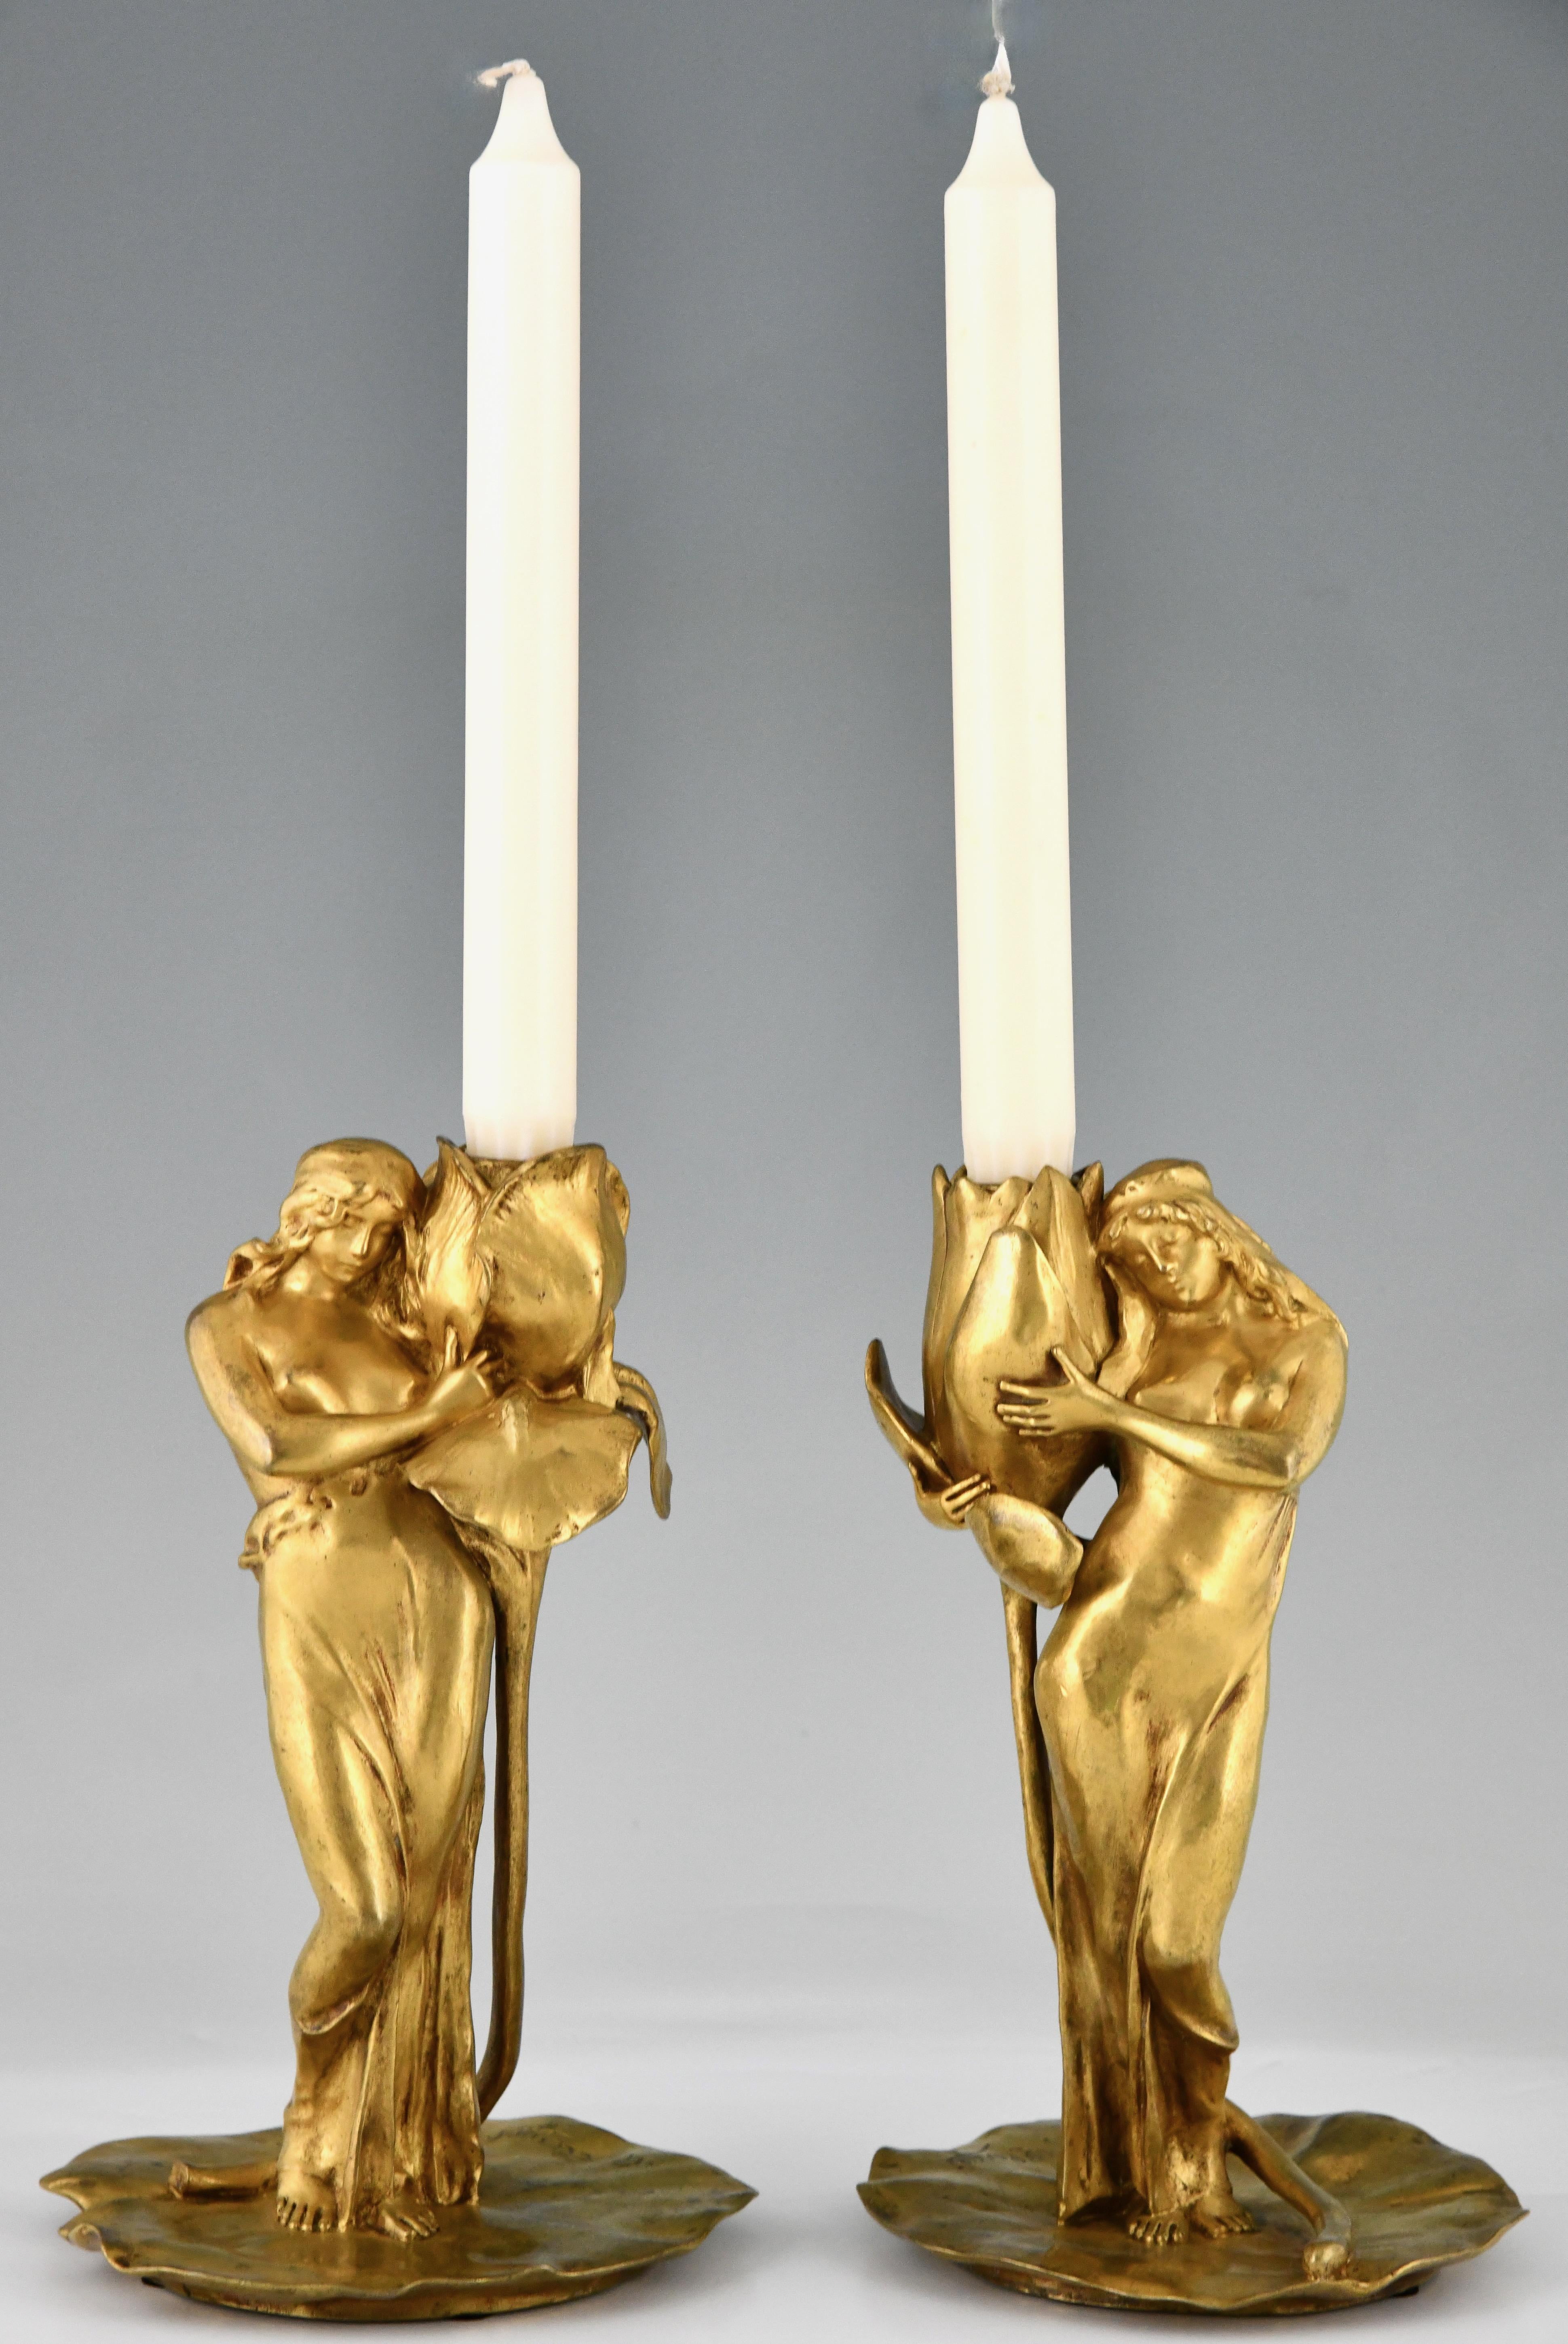 20th Century Art Nouveau gilt bronze candlesticks lady with flower Iris & Lotus by A. Clerget